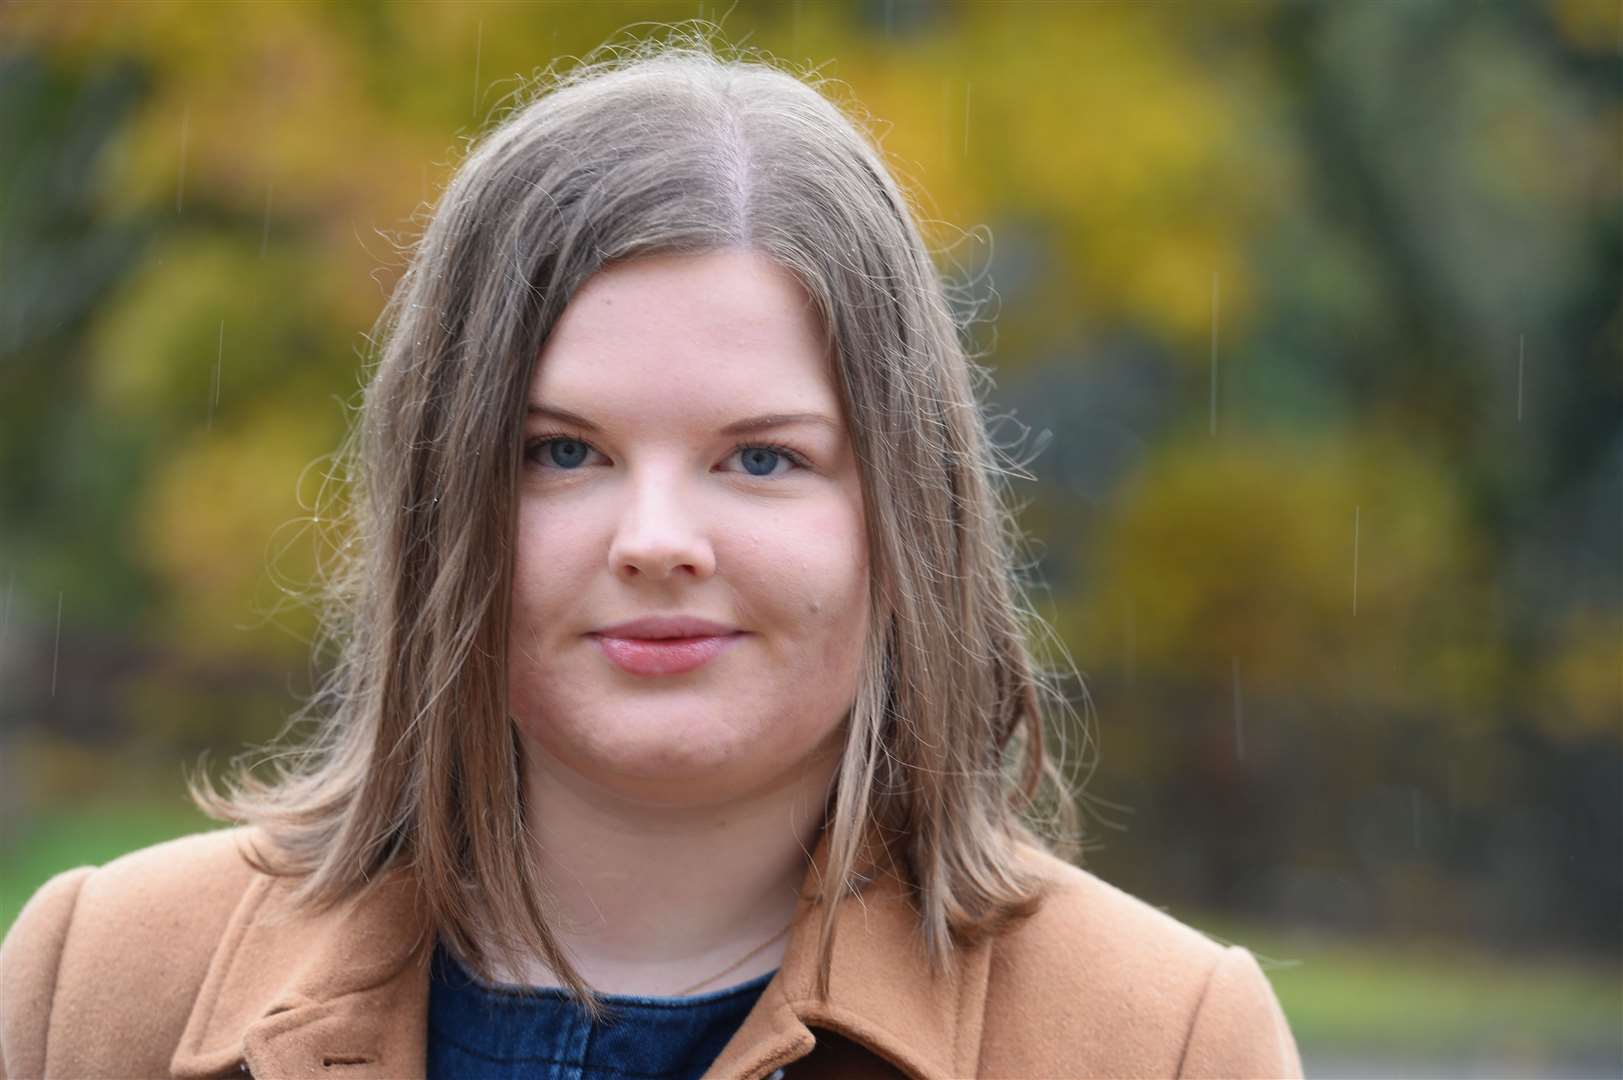 Molly Nolan, the Lib Dem candidate for Caithness, Sutherland and Ross, says the council boundary proposals should be consigned to the dustbin. Picture: Gary Anthony